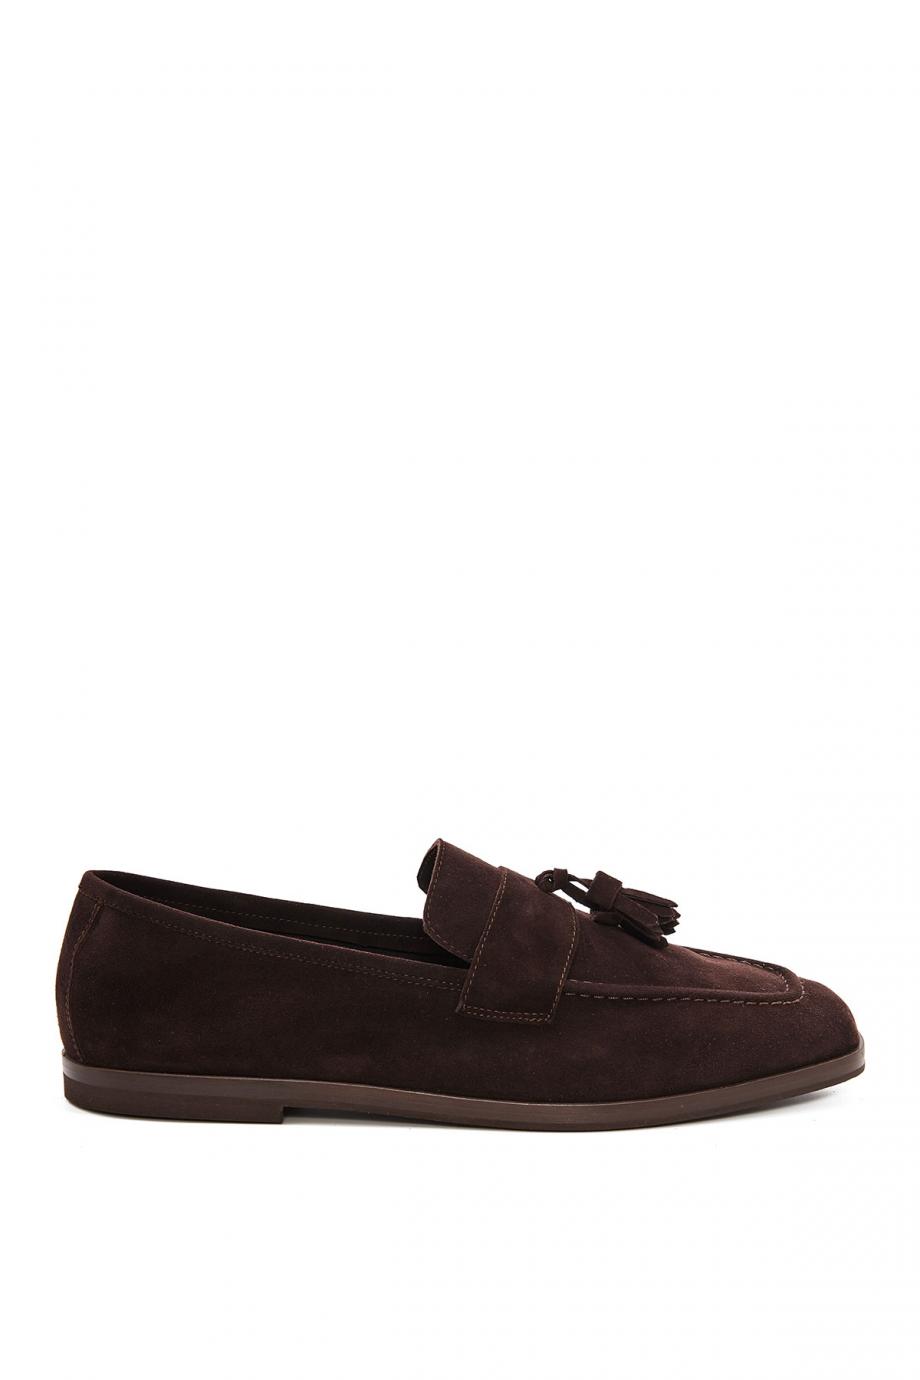 Chalet Uomo tasseled suede loafers